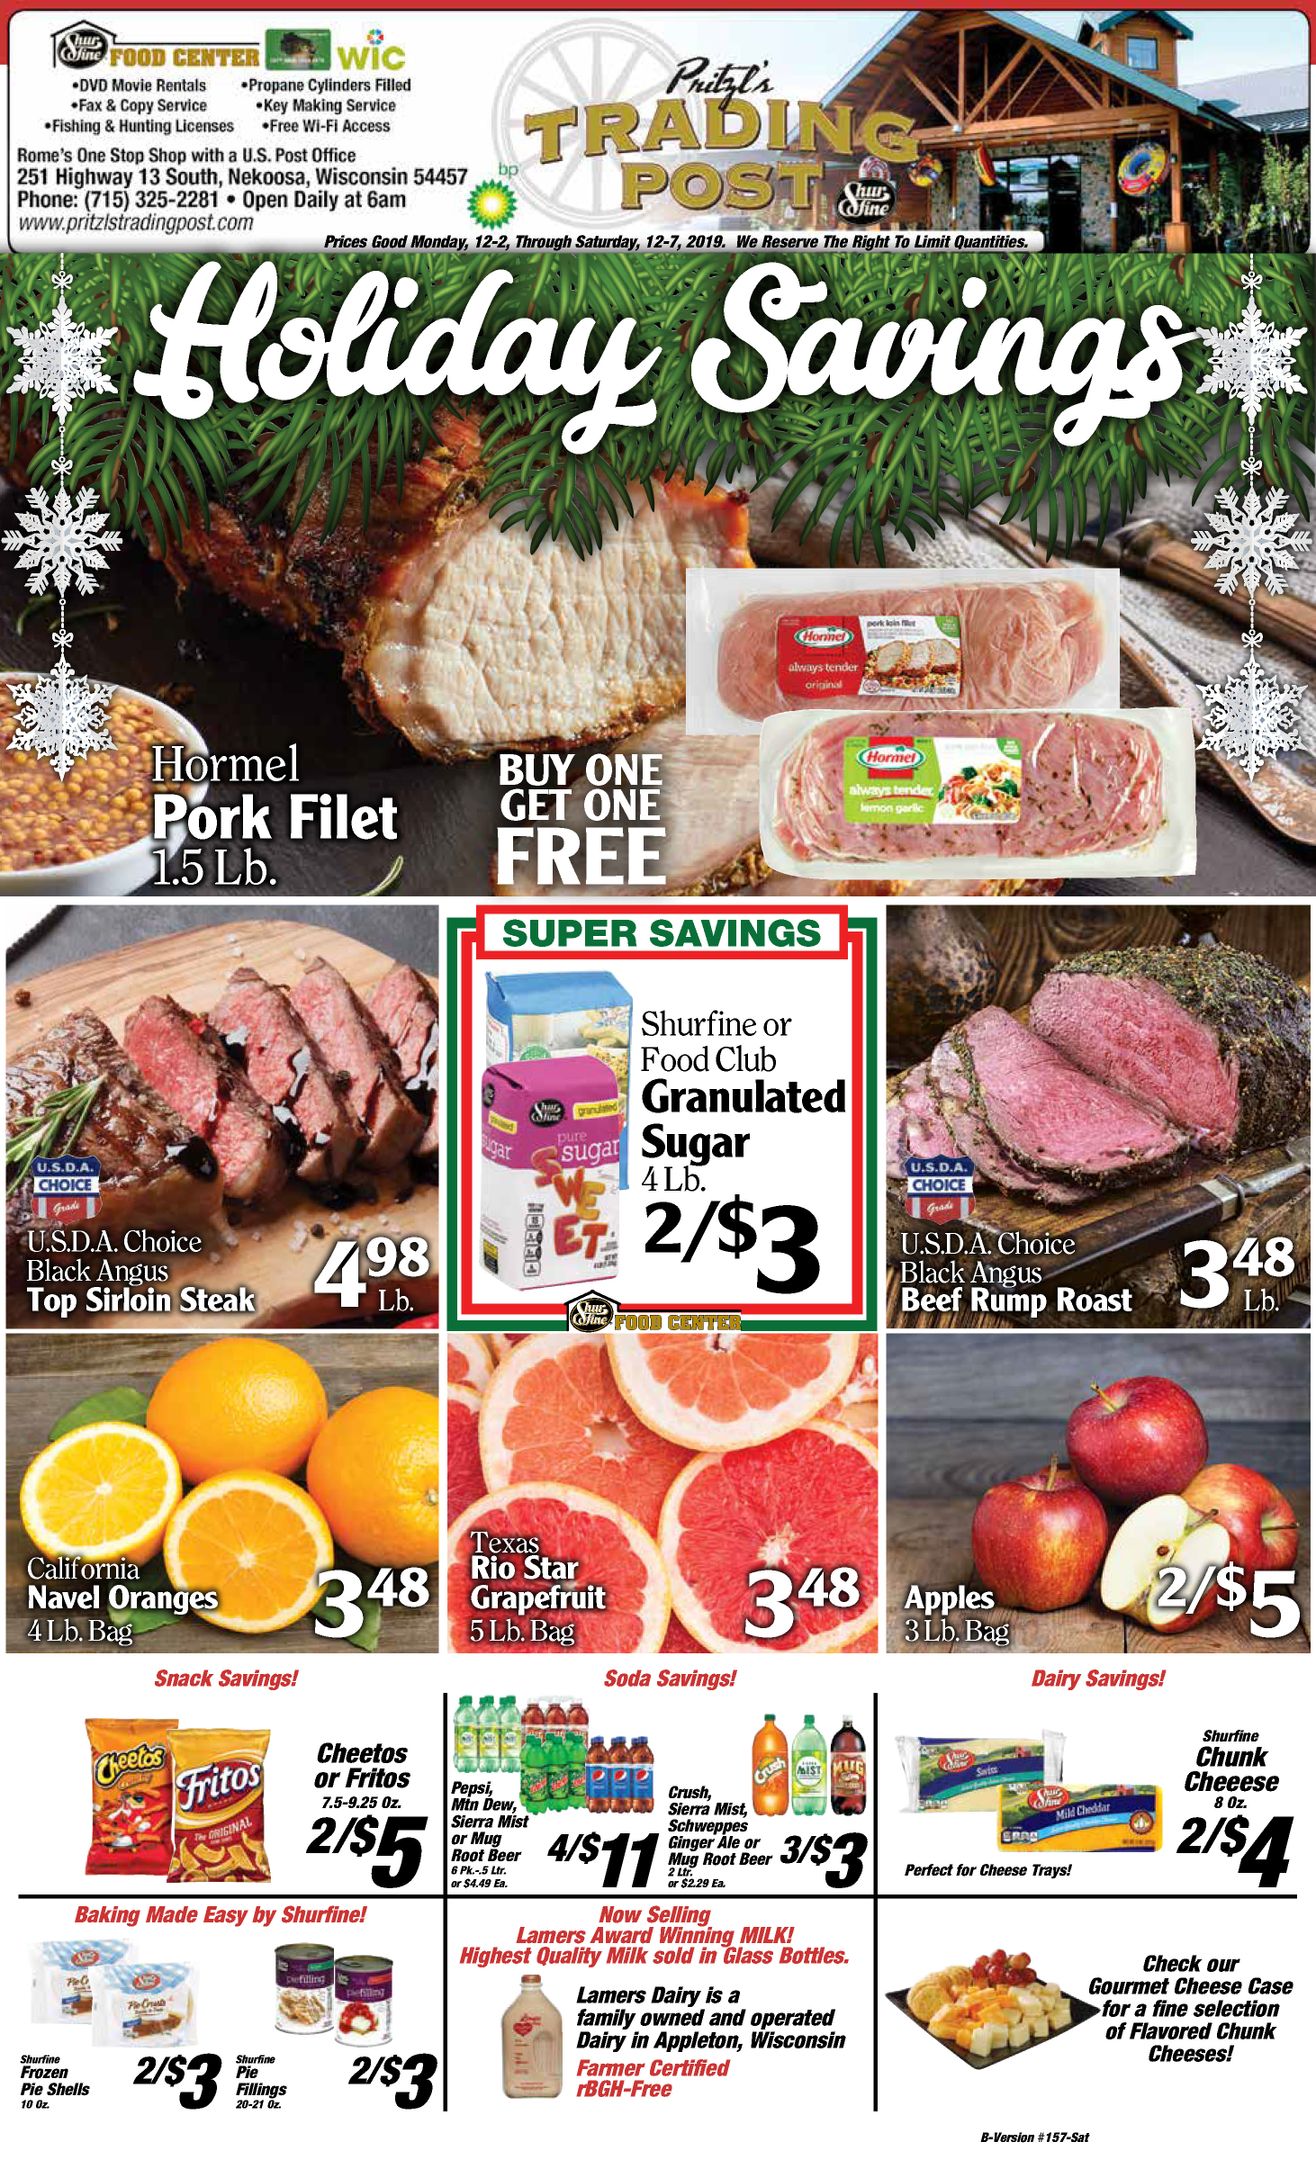 Pritzl's Trading Post Weekly Ad - Page 1